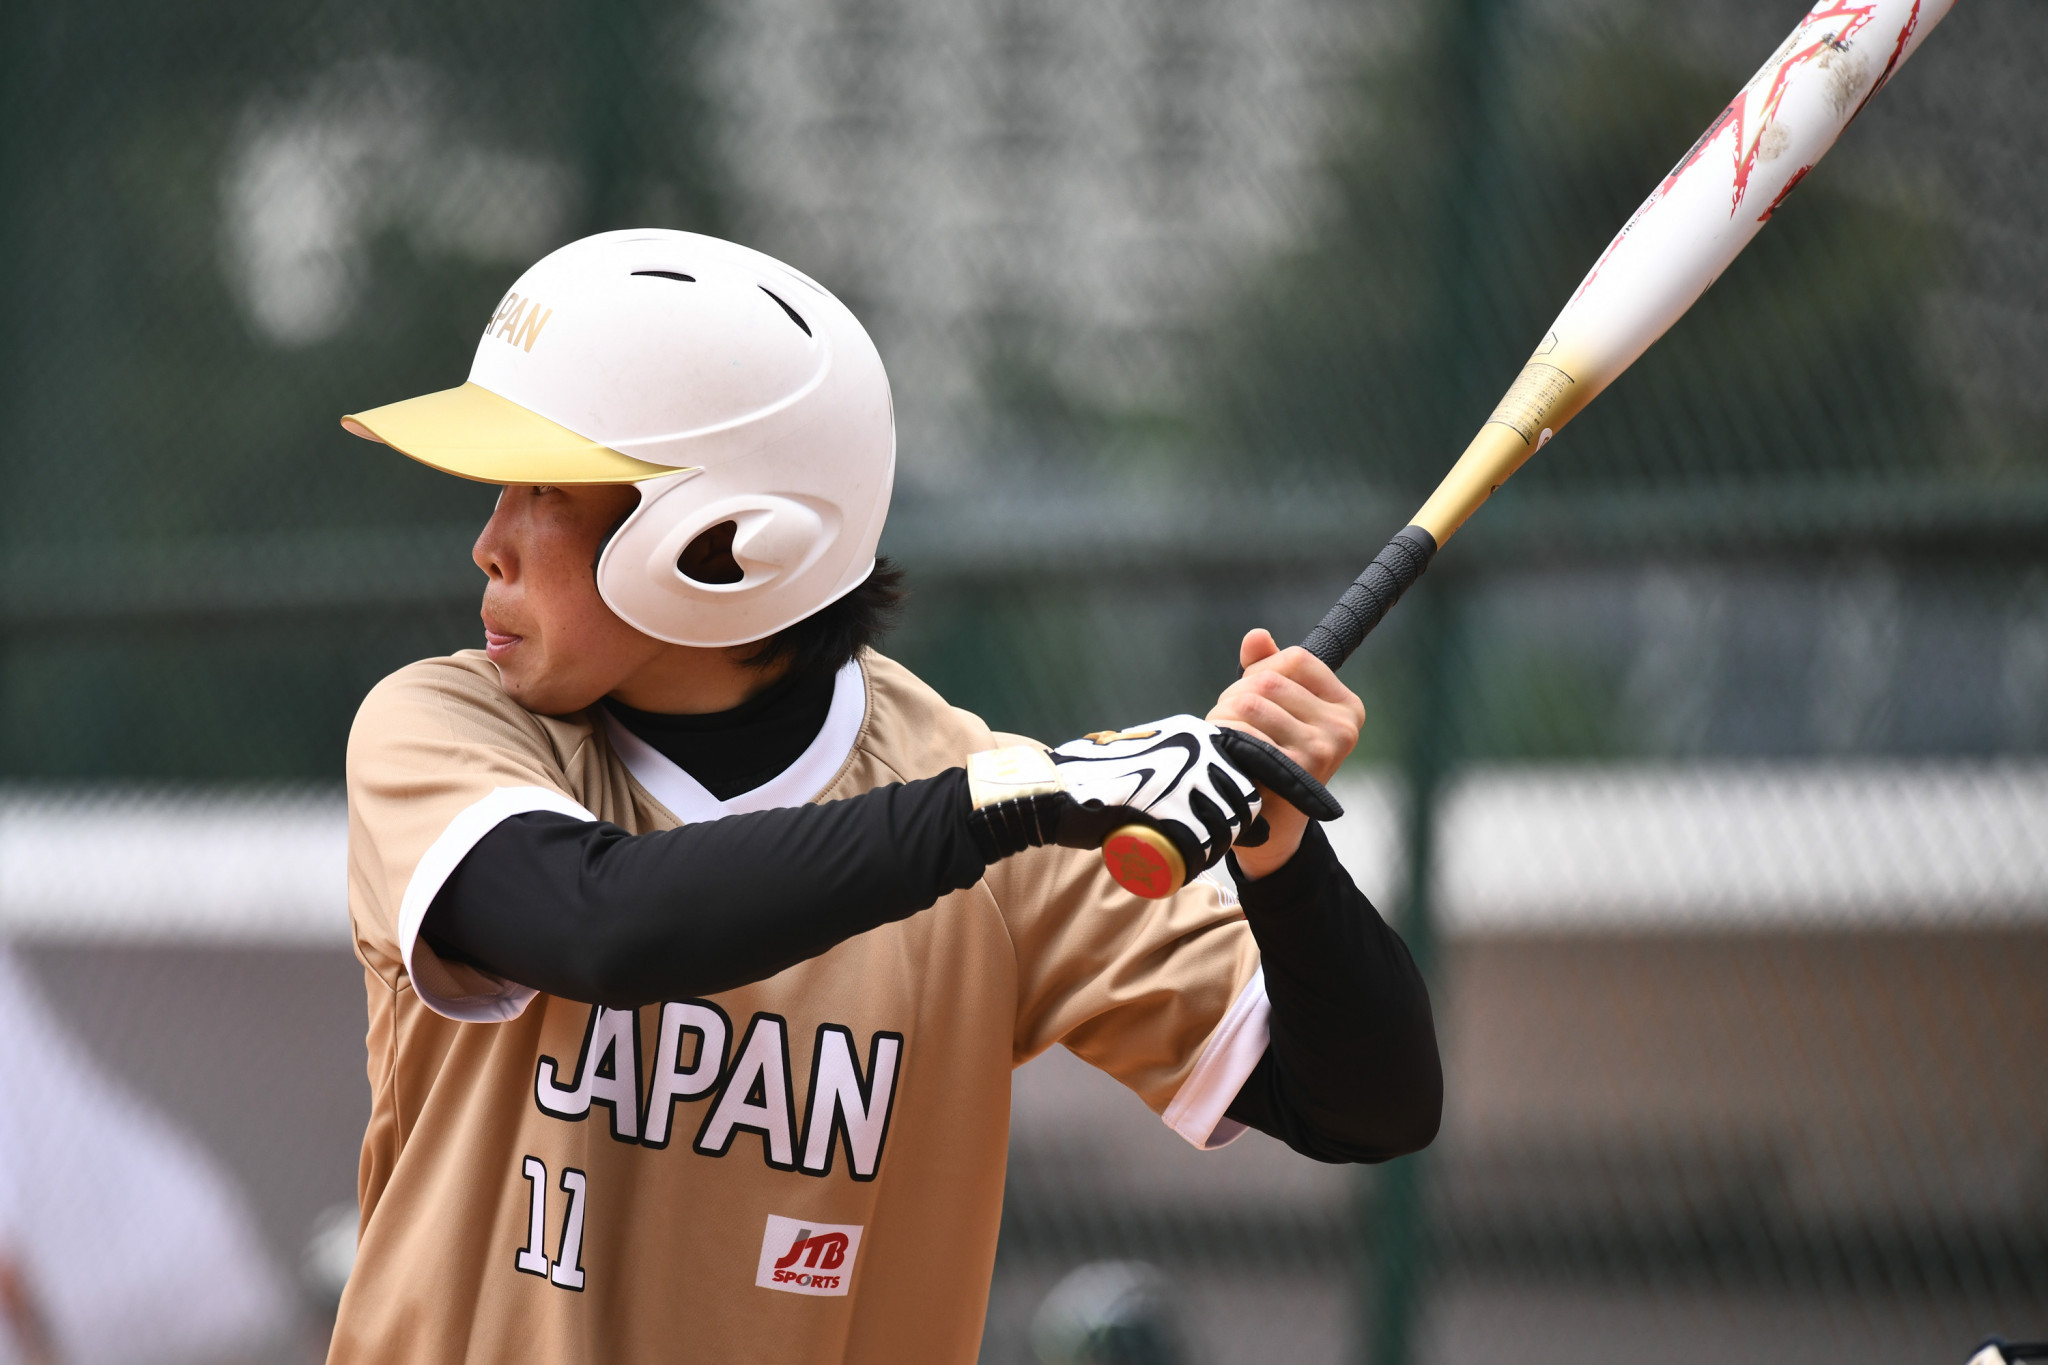 Japanese softball player Eri Yamada was given the World Games athlete of the month award for August ©Getty Images